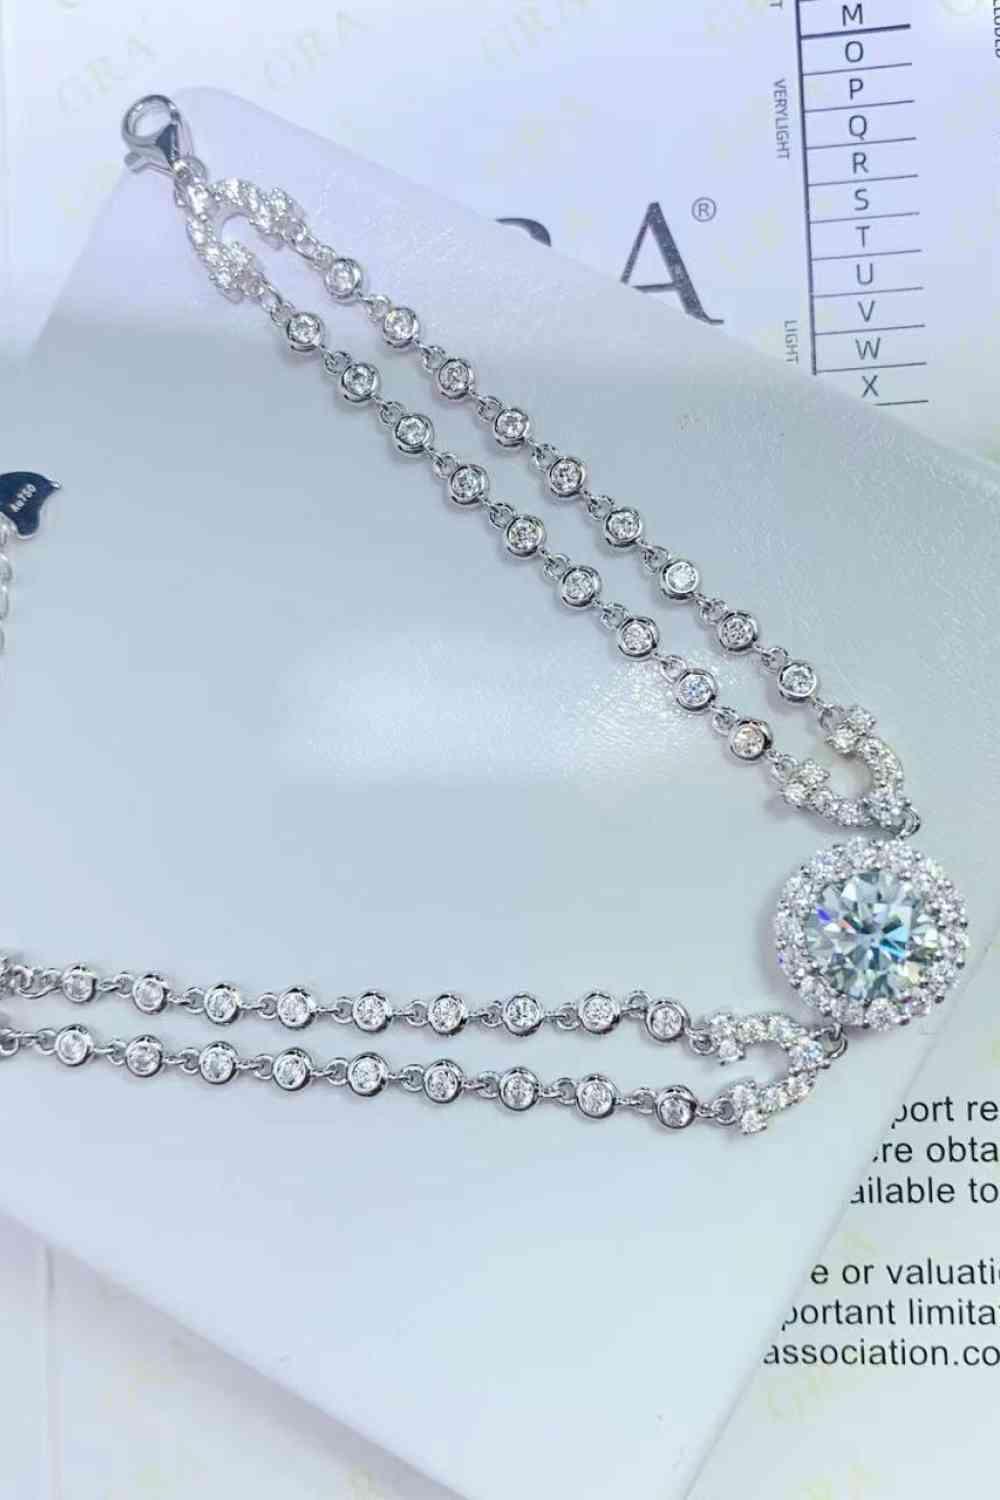 a necklace with a diamond on top of it